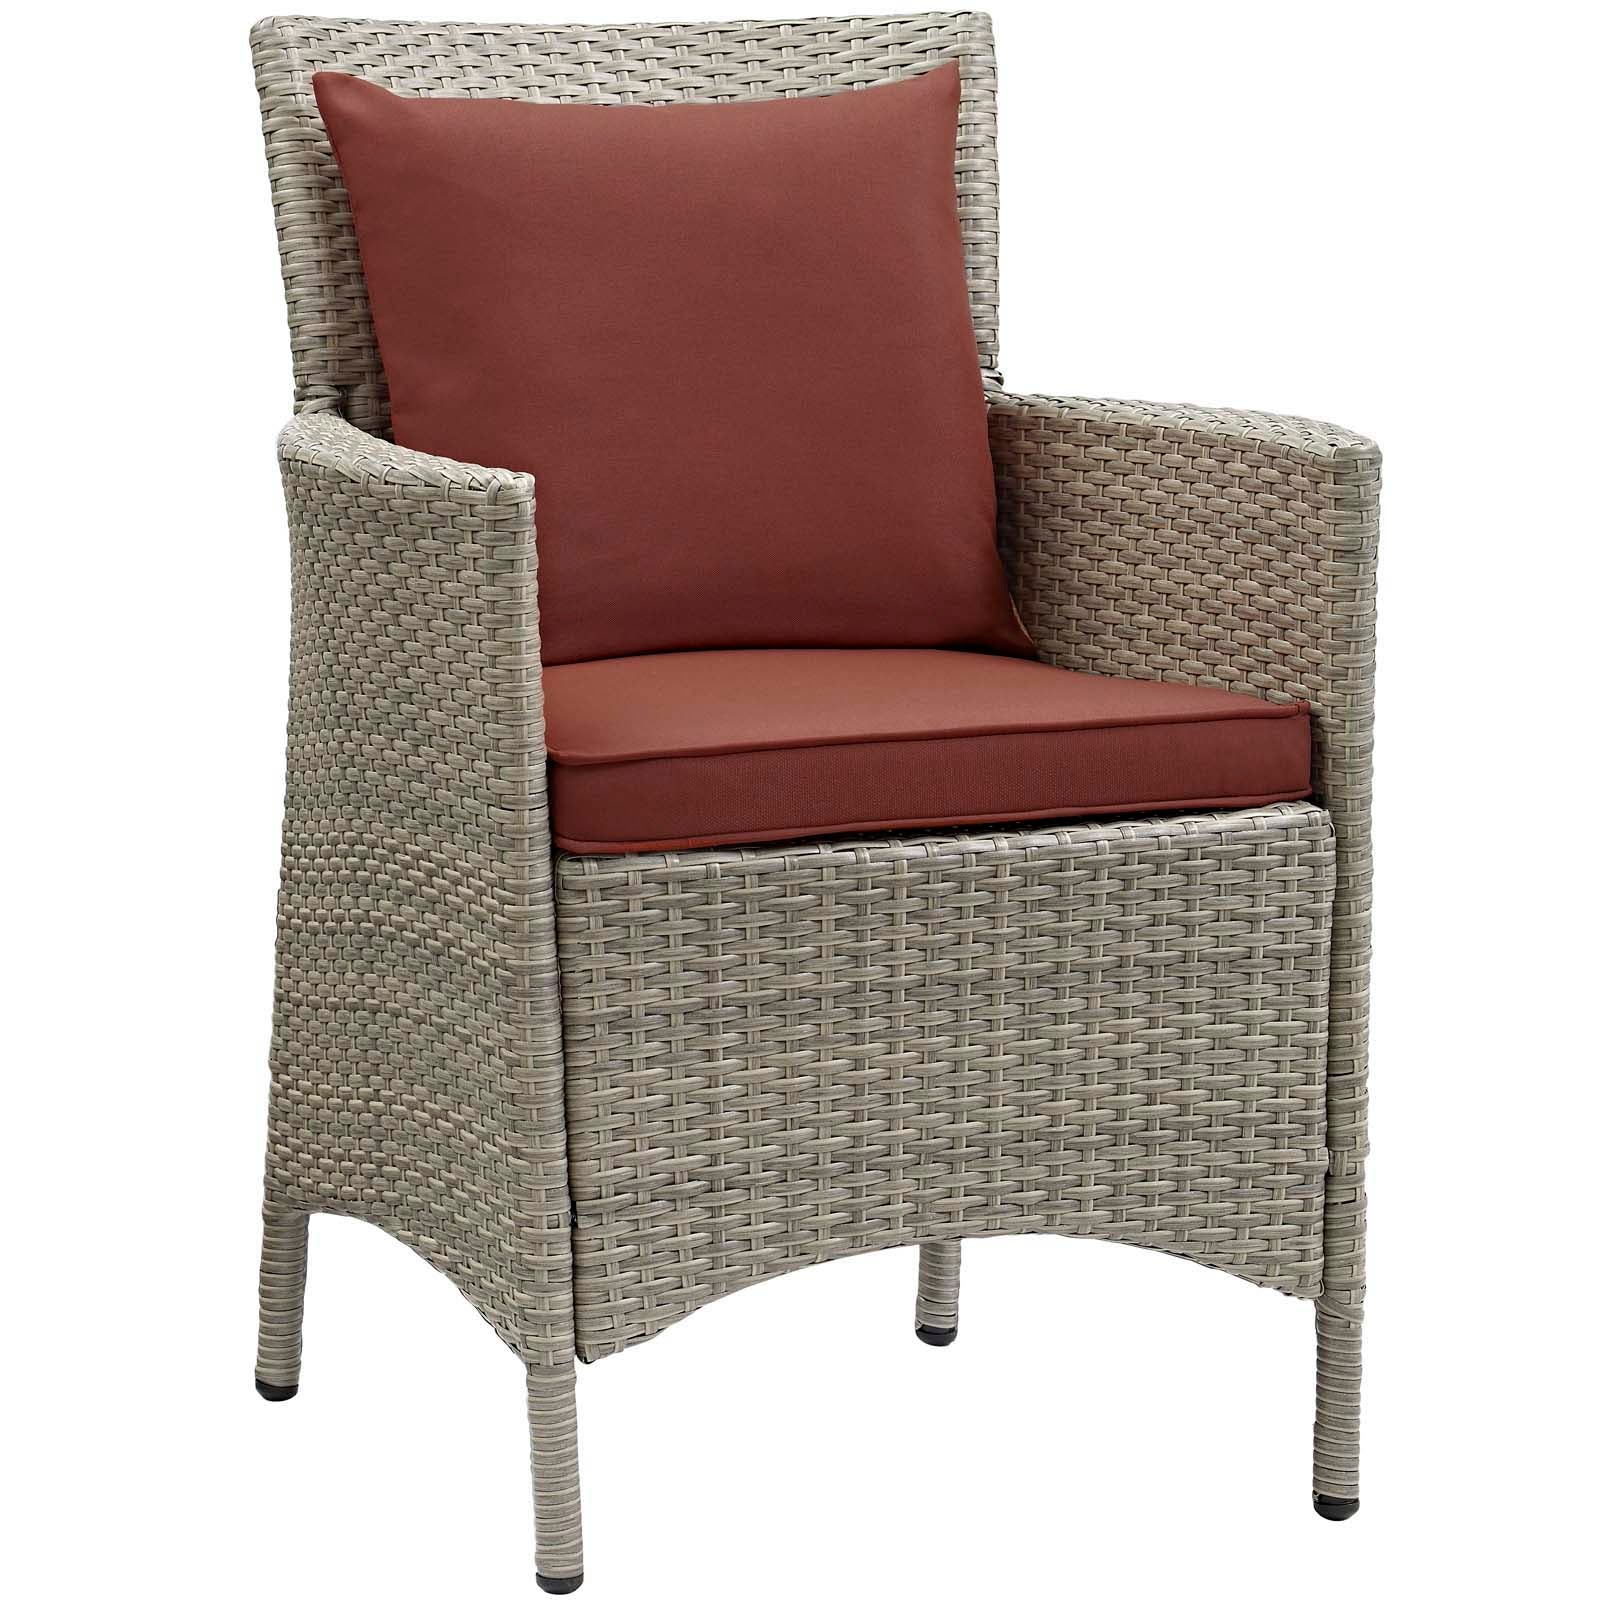 Modway Outdoor Barstools - Conduit Outdoor Patio Wicker Rattan Dining Armchair (Set of 2) Light Gray Currant